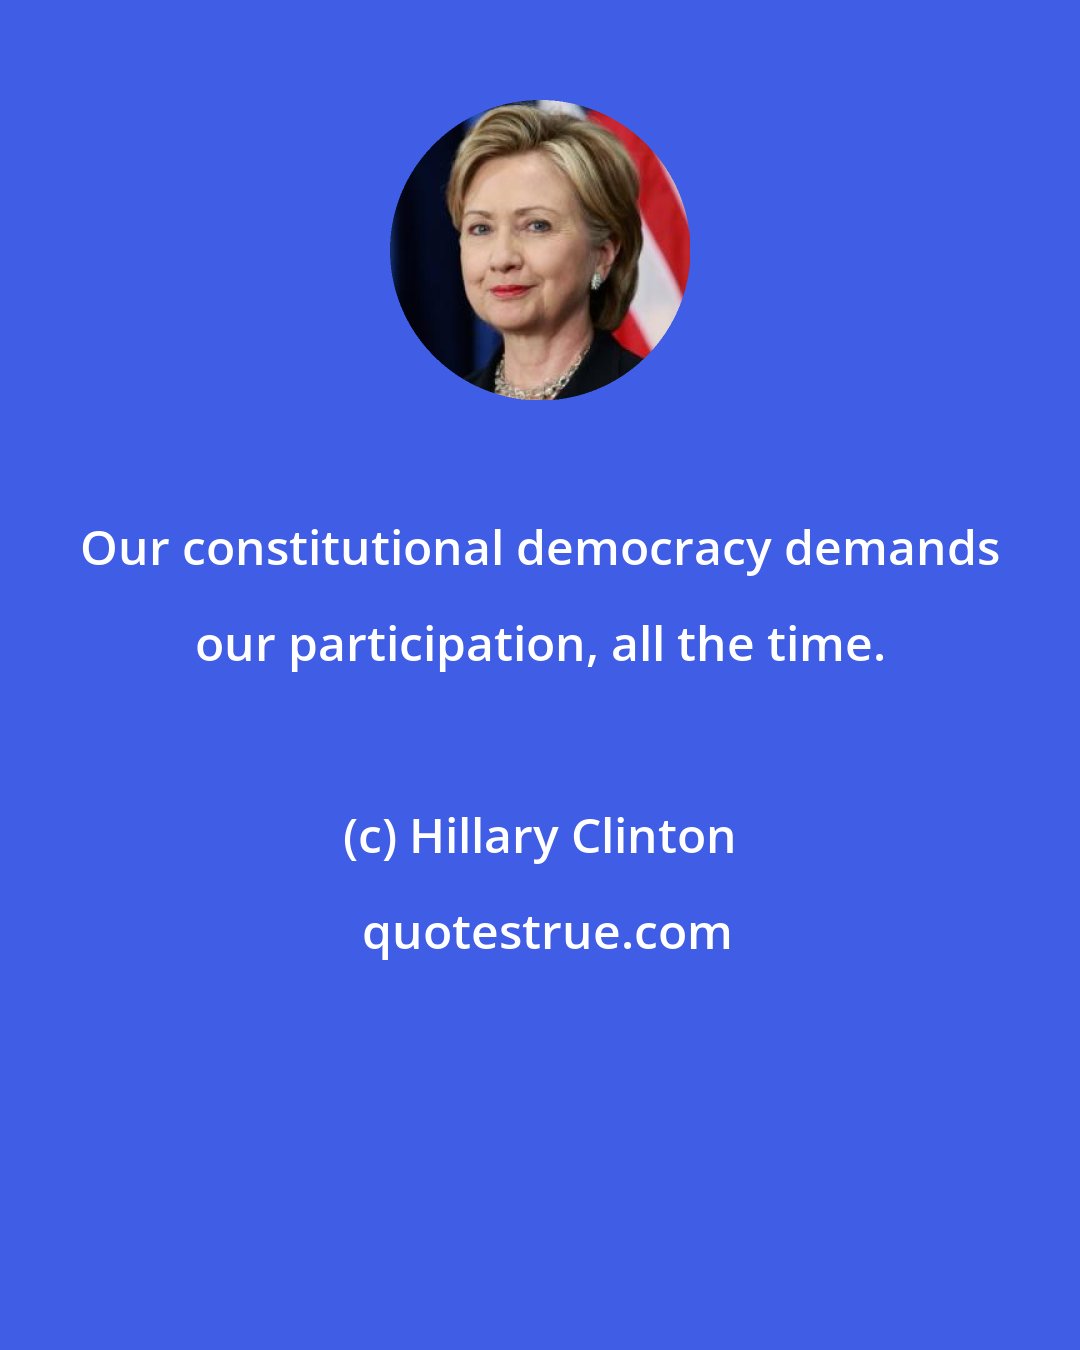 Hillary Clinton: Our constitutional democracy demands our participation, all the time.